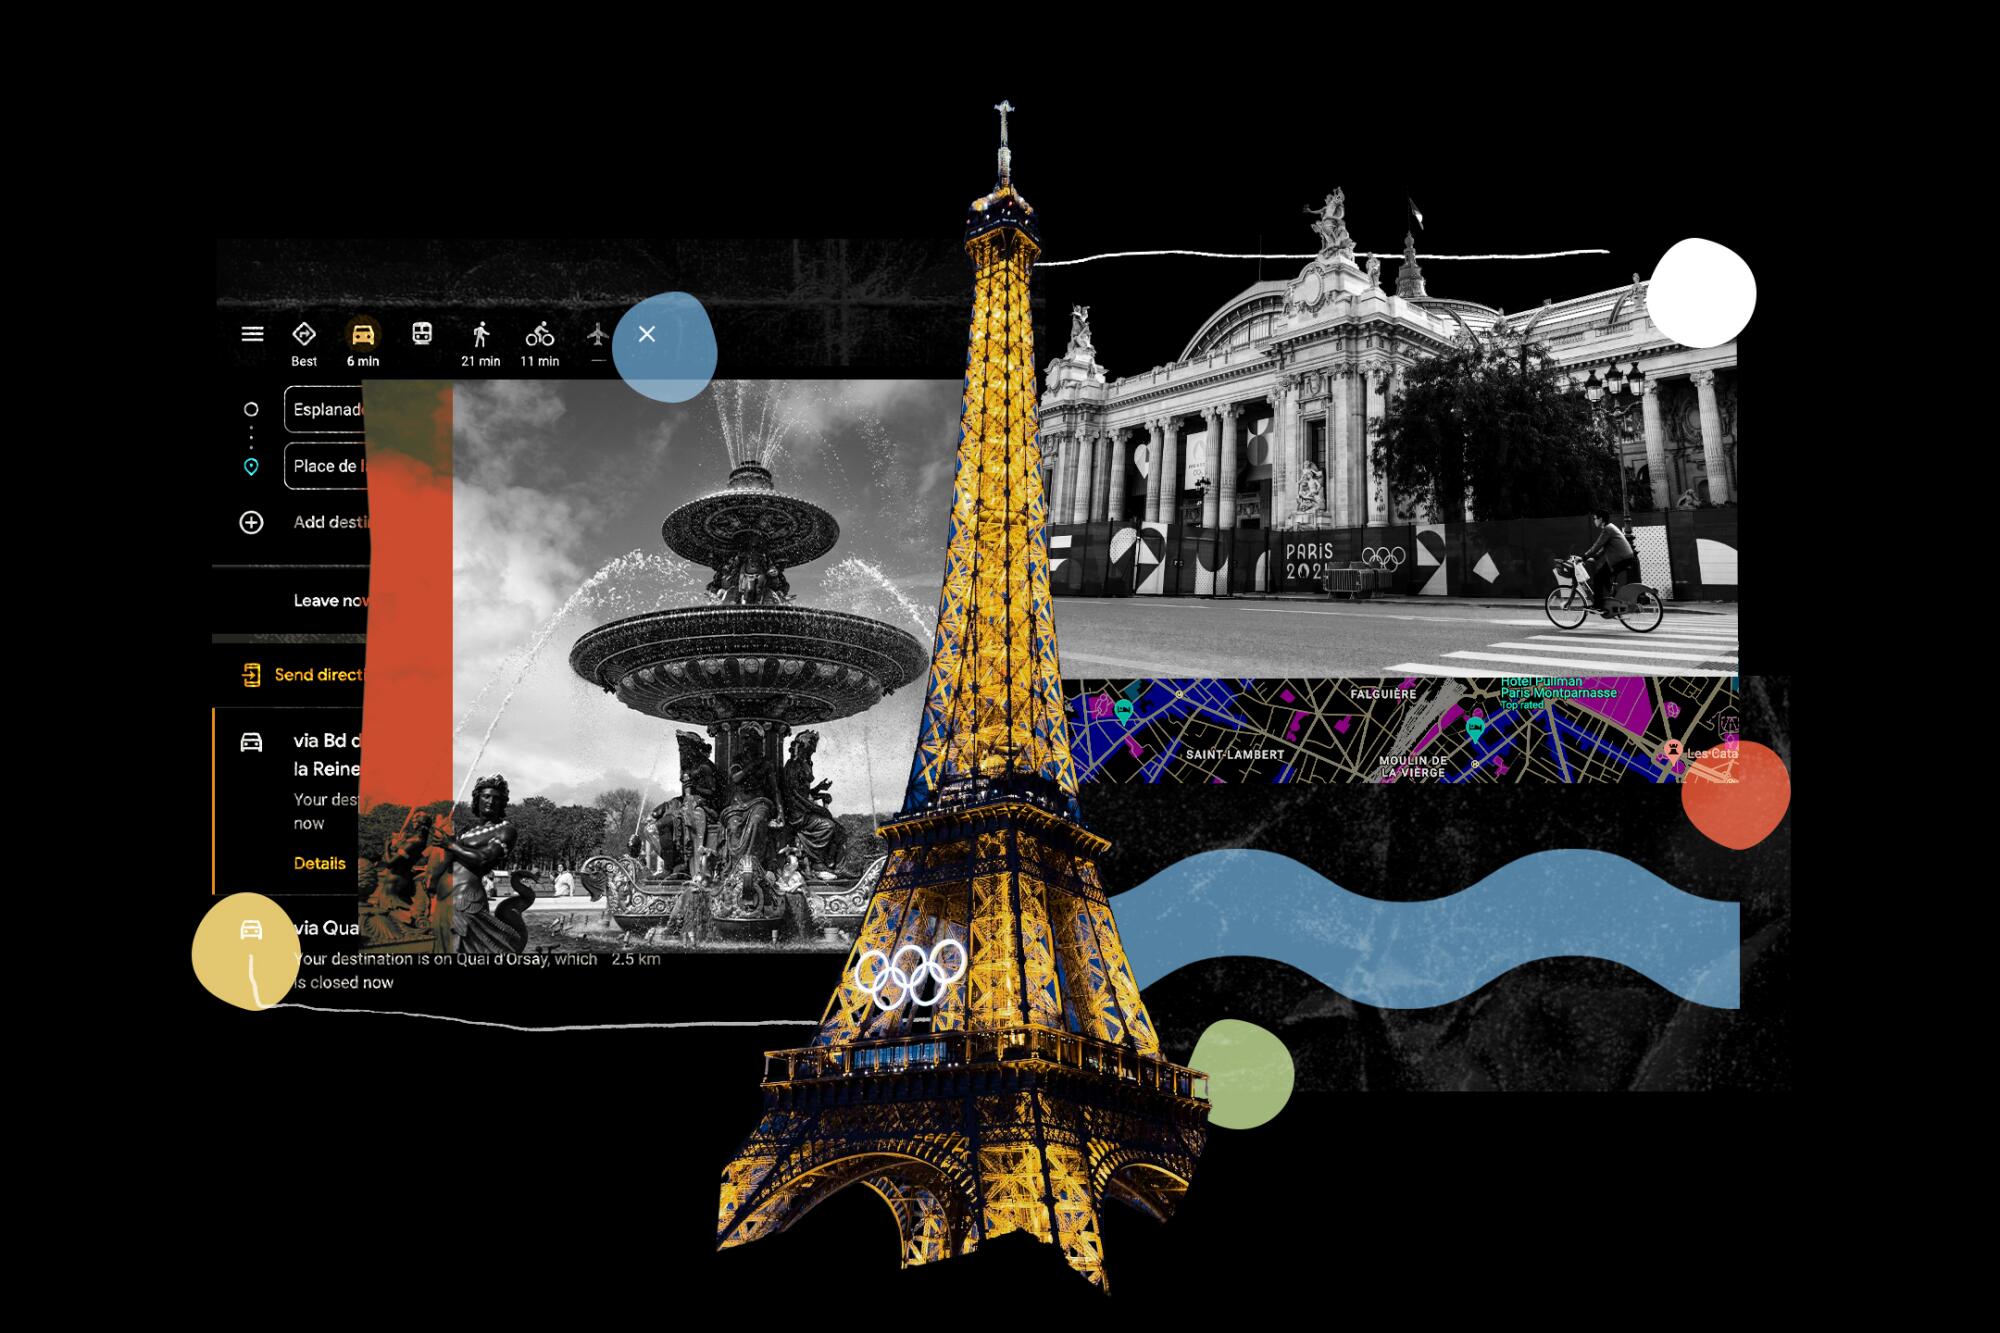 A collage of the Fontaine des Mers on the Place de la Concorde square, the Eiffel tower at night and The Grand Palais